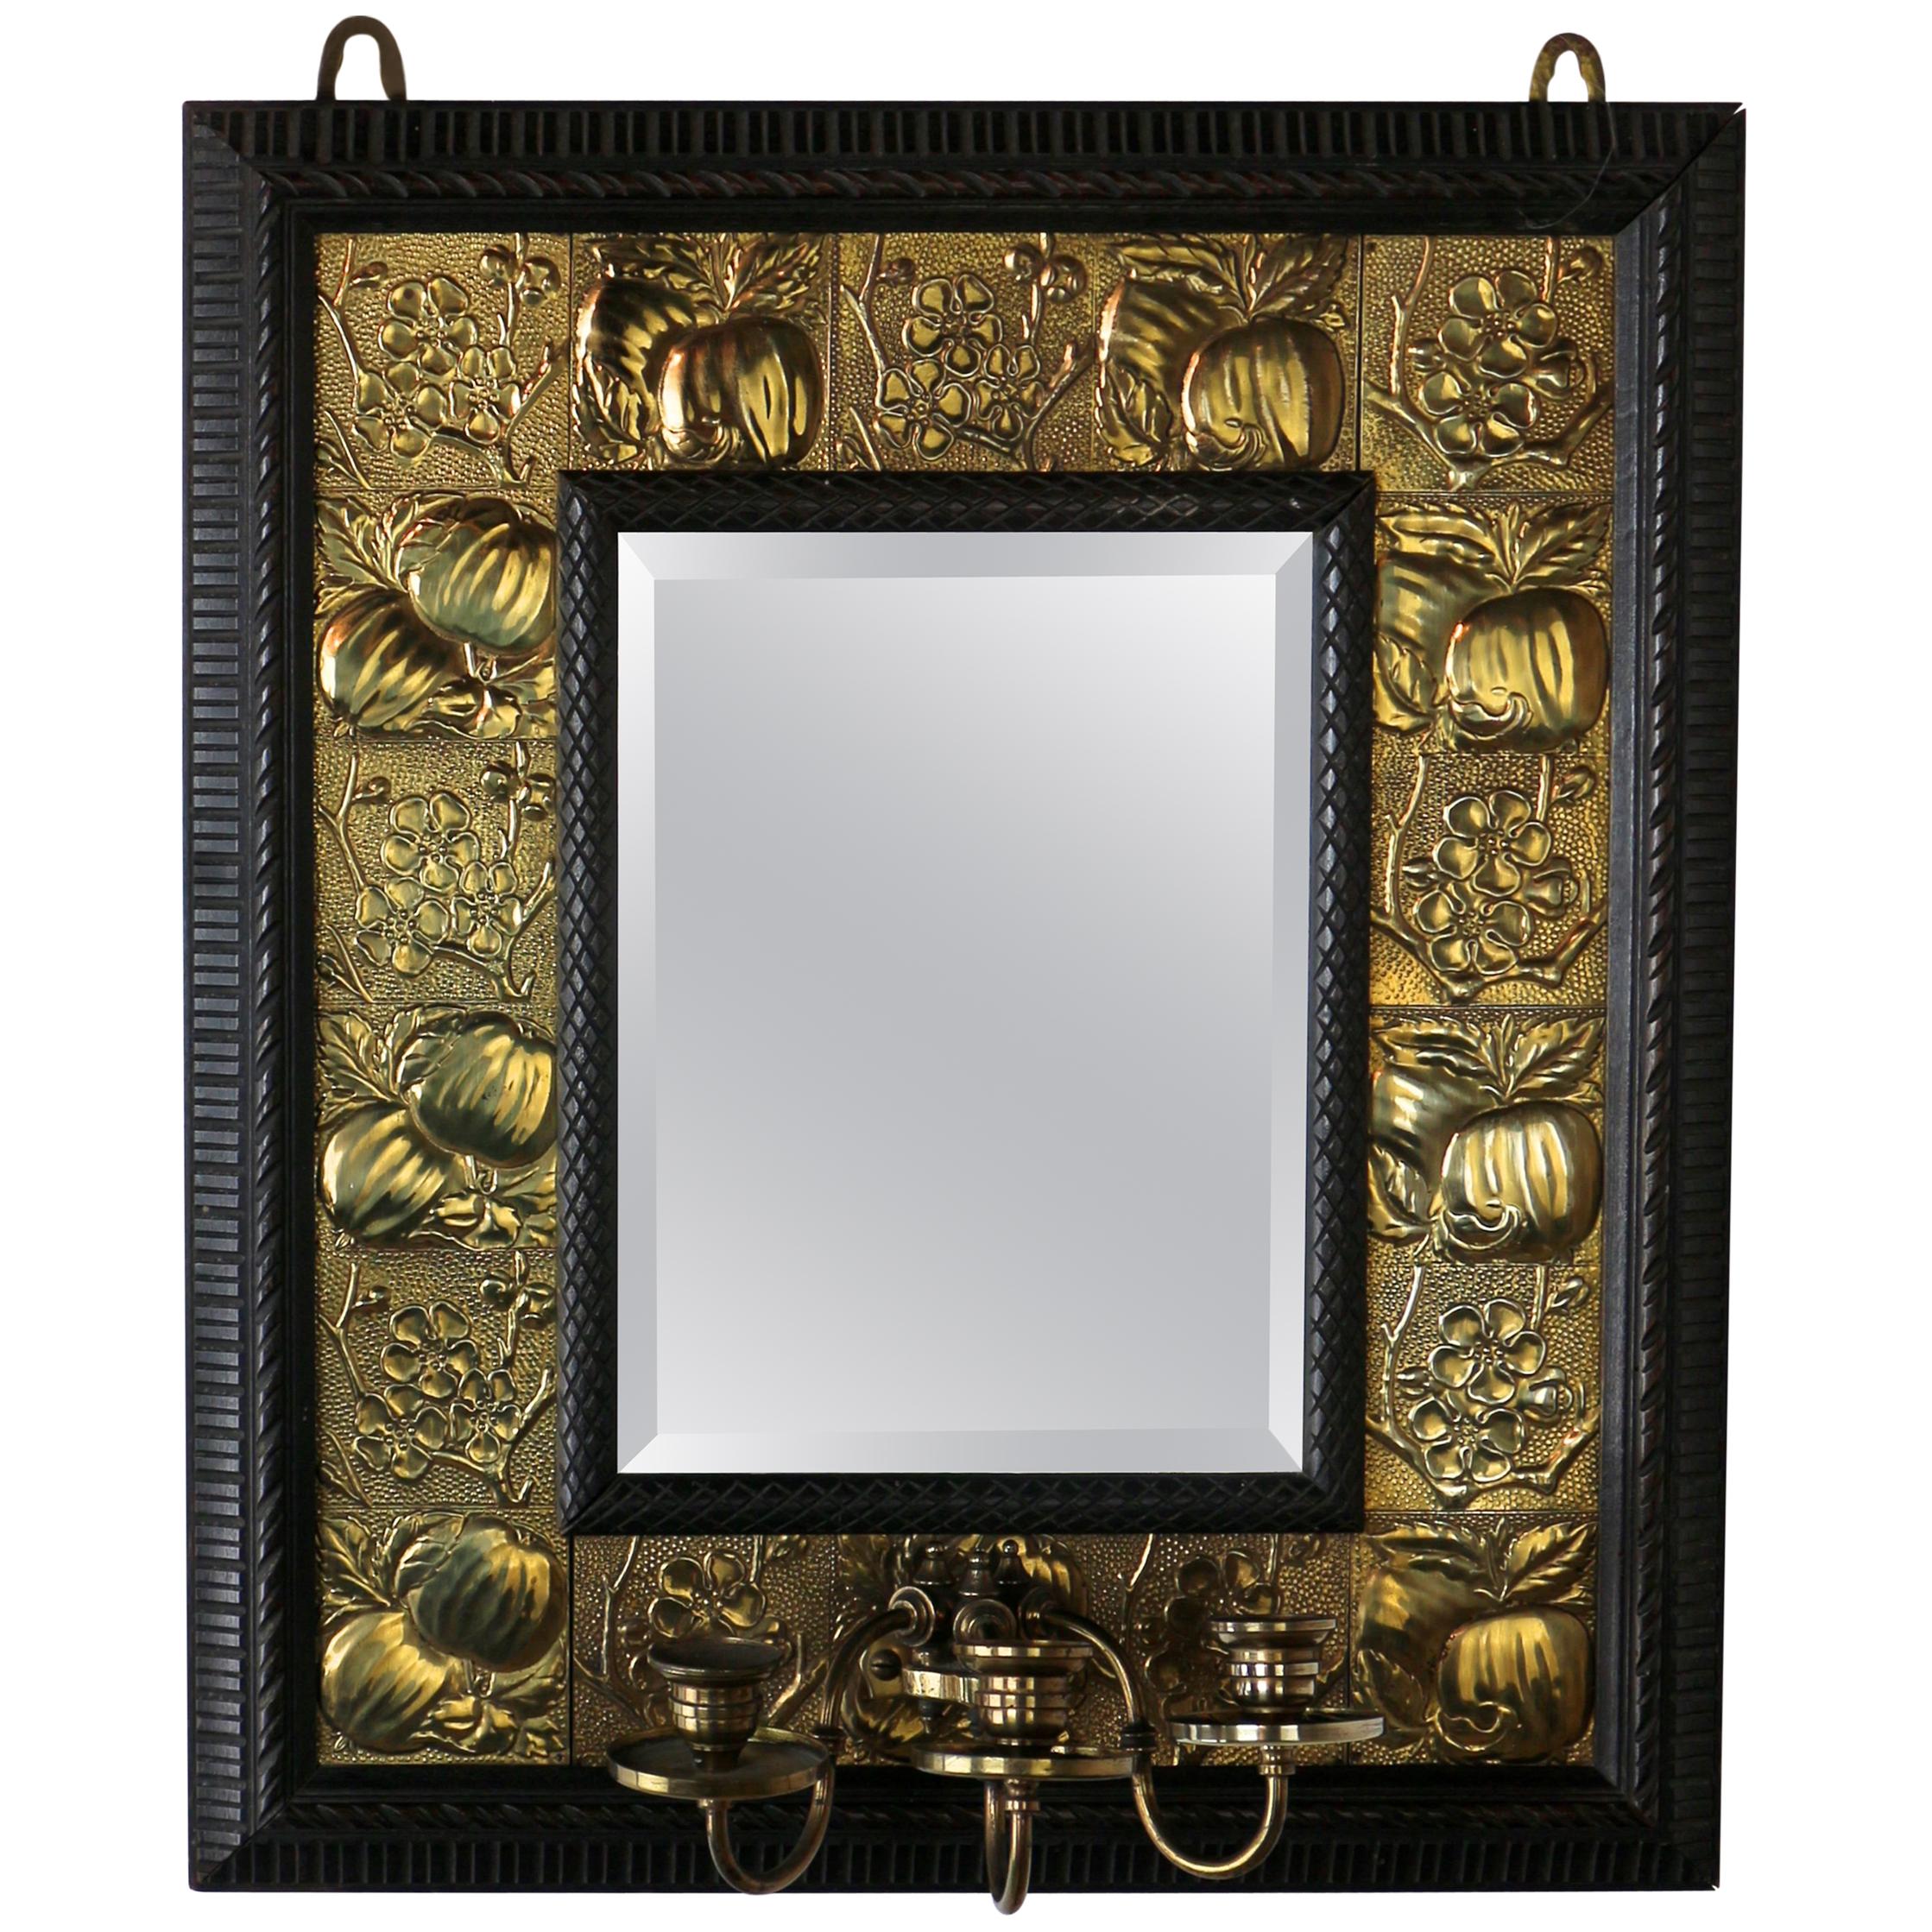 Arts & Crafts Ebonized Mahogany & Brass Mirror, Attributed to Shapland & Petter